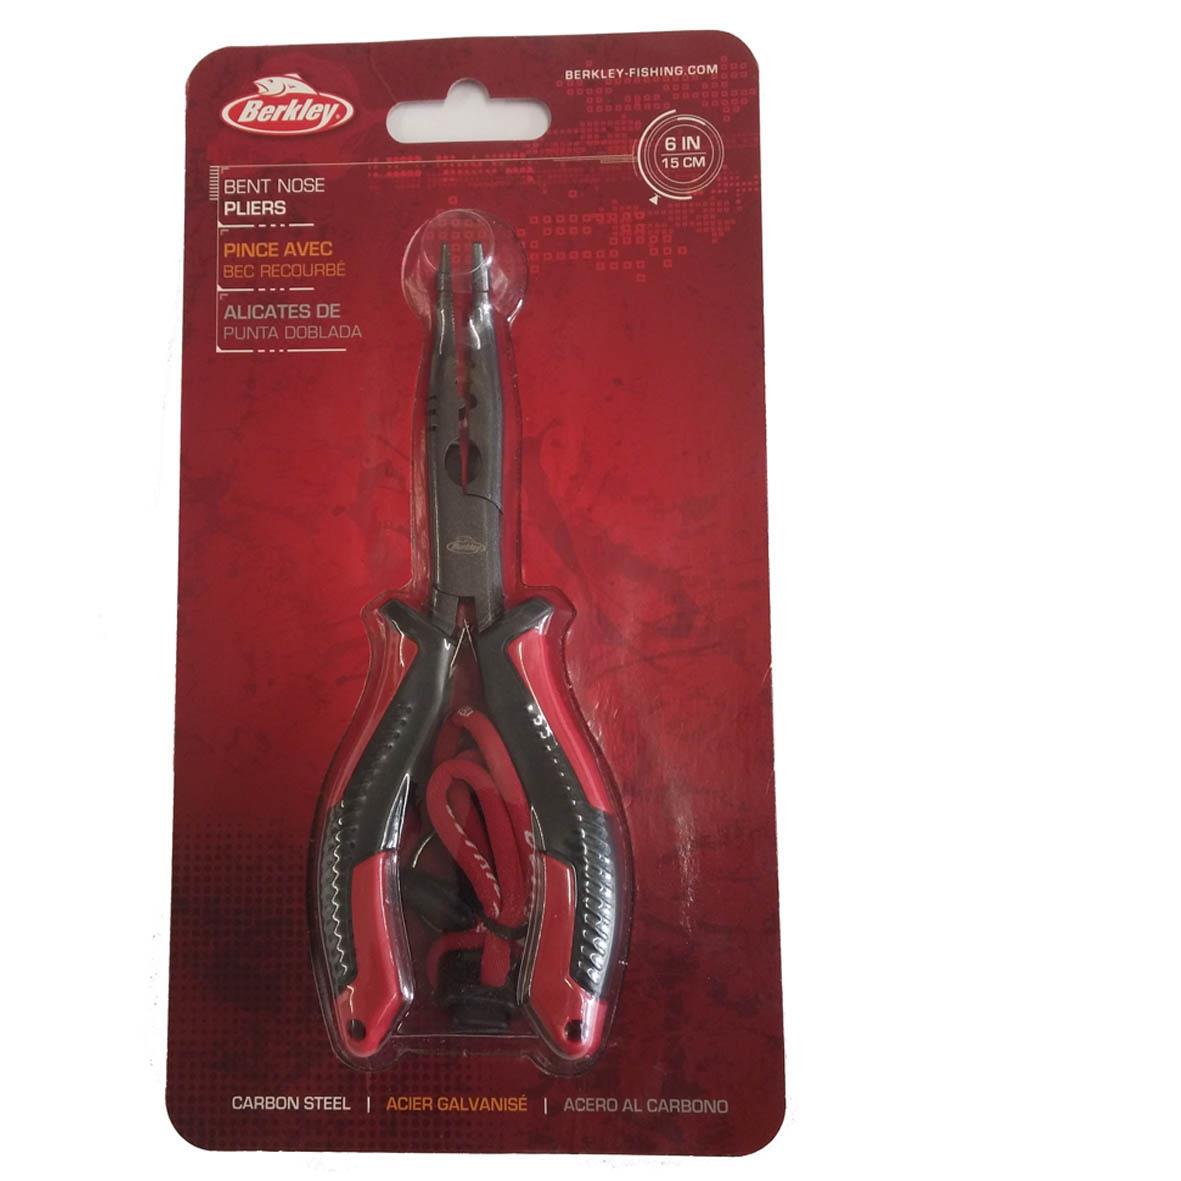 Berkley Bent Nose Fishing Pliers With Lanyard  6" - Cutting - Crimping - Tuning Features